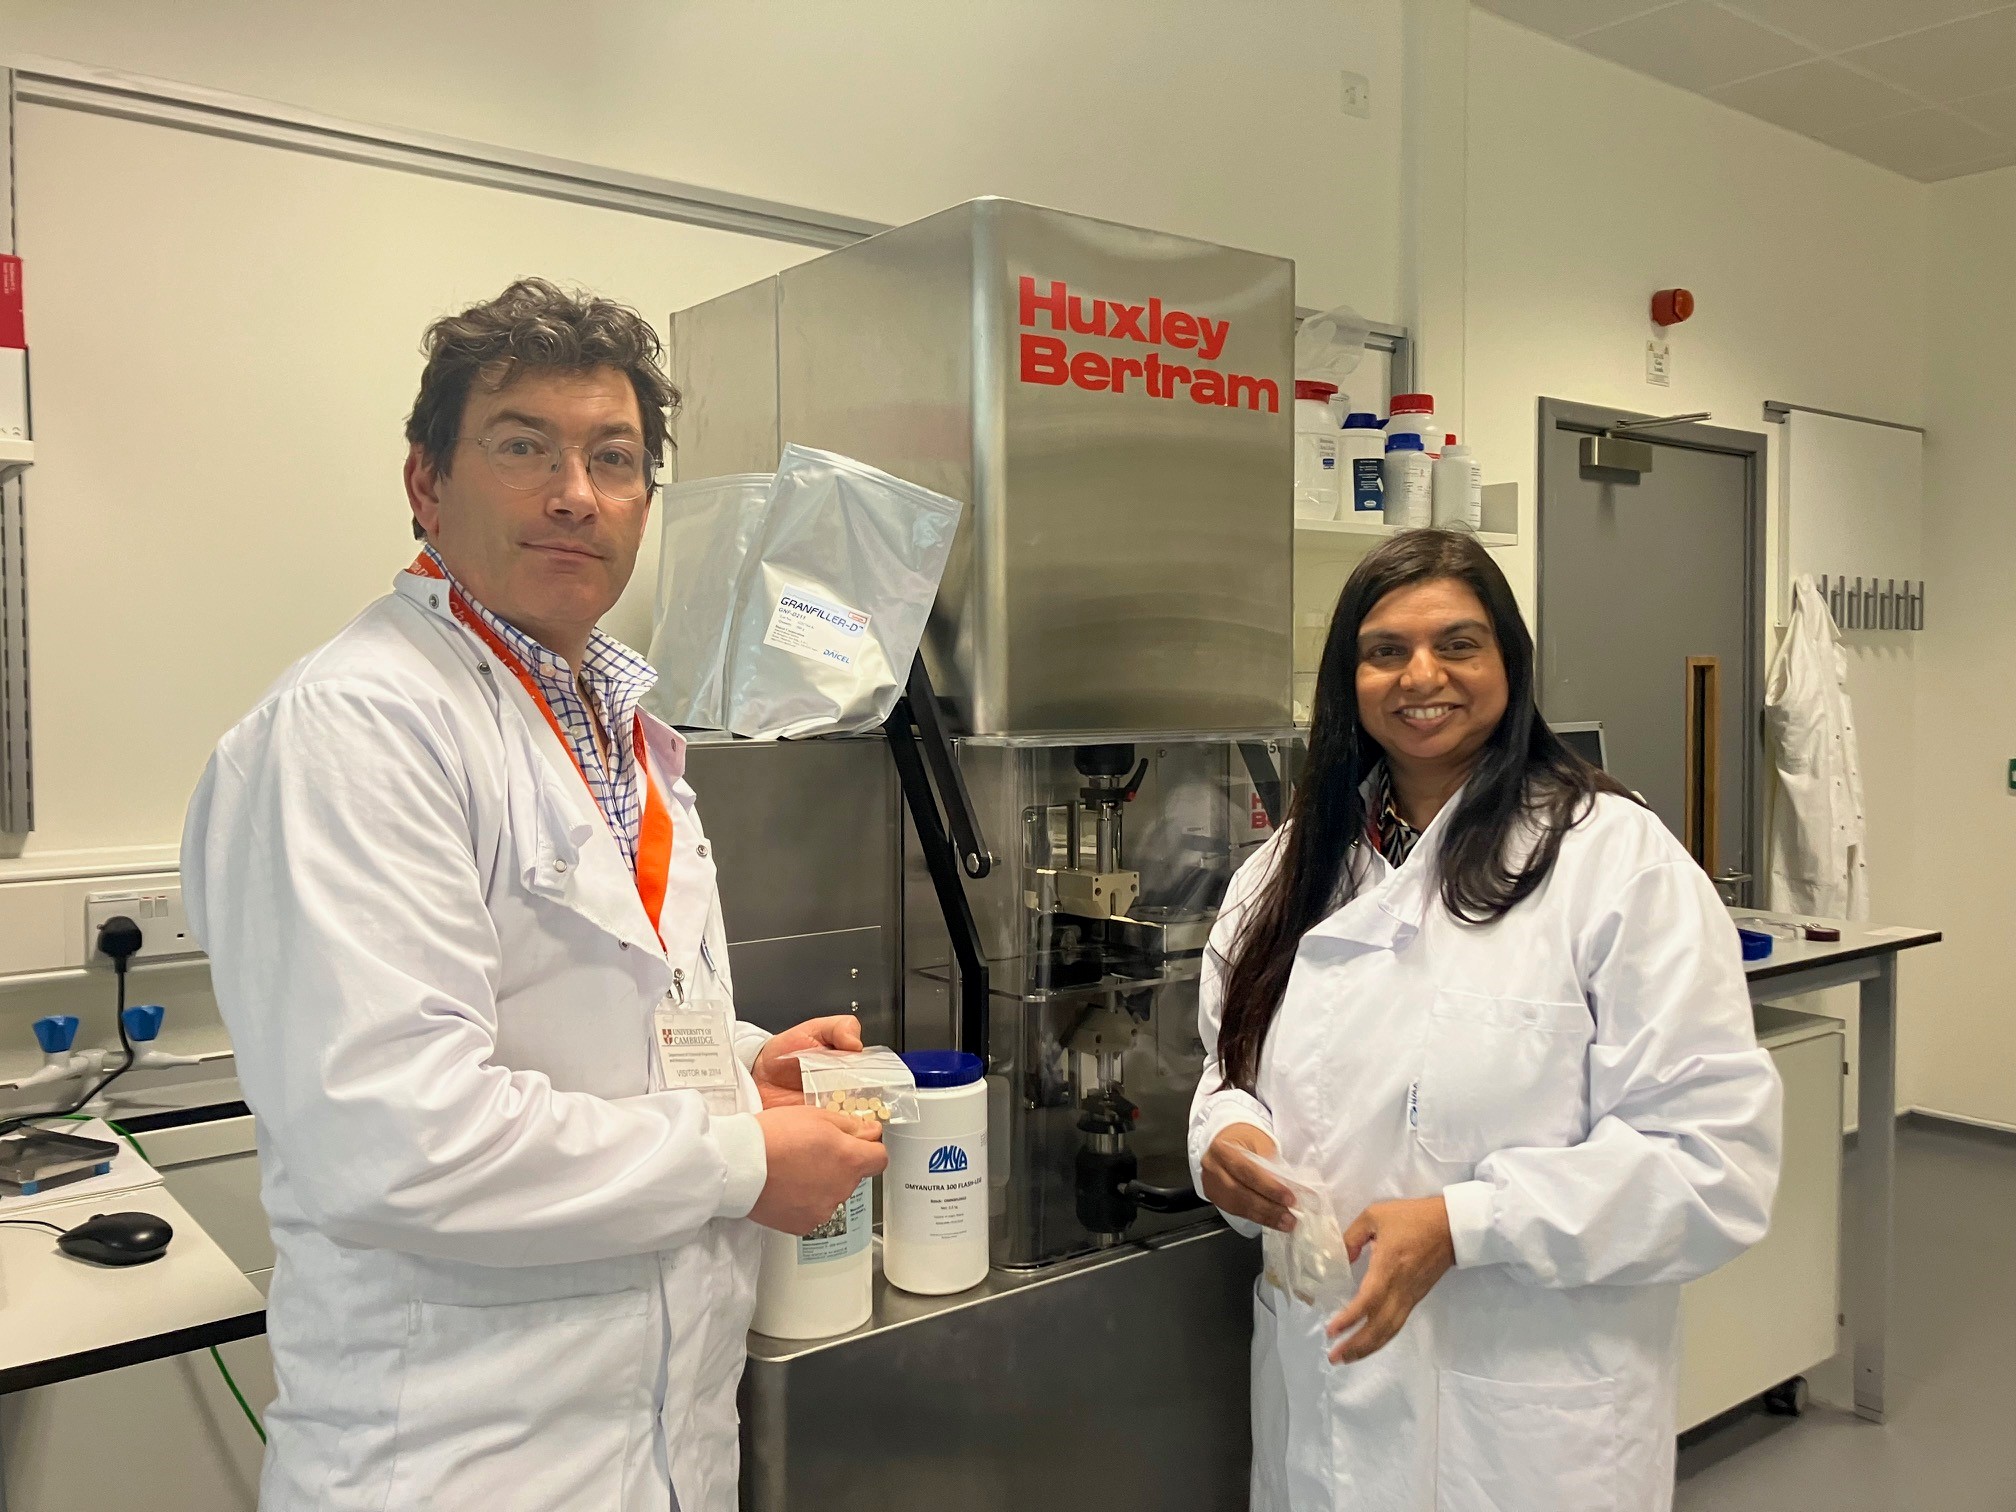 Huxley Bertram and Chemlink Visit to Terahertz Application Group, Department of Chemical Engineering and Biotechnology, University of Cambridge